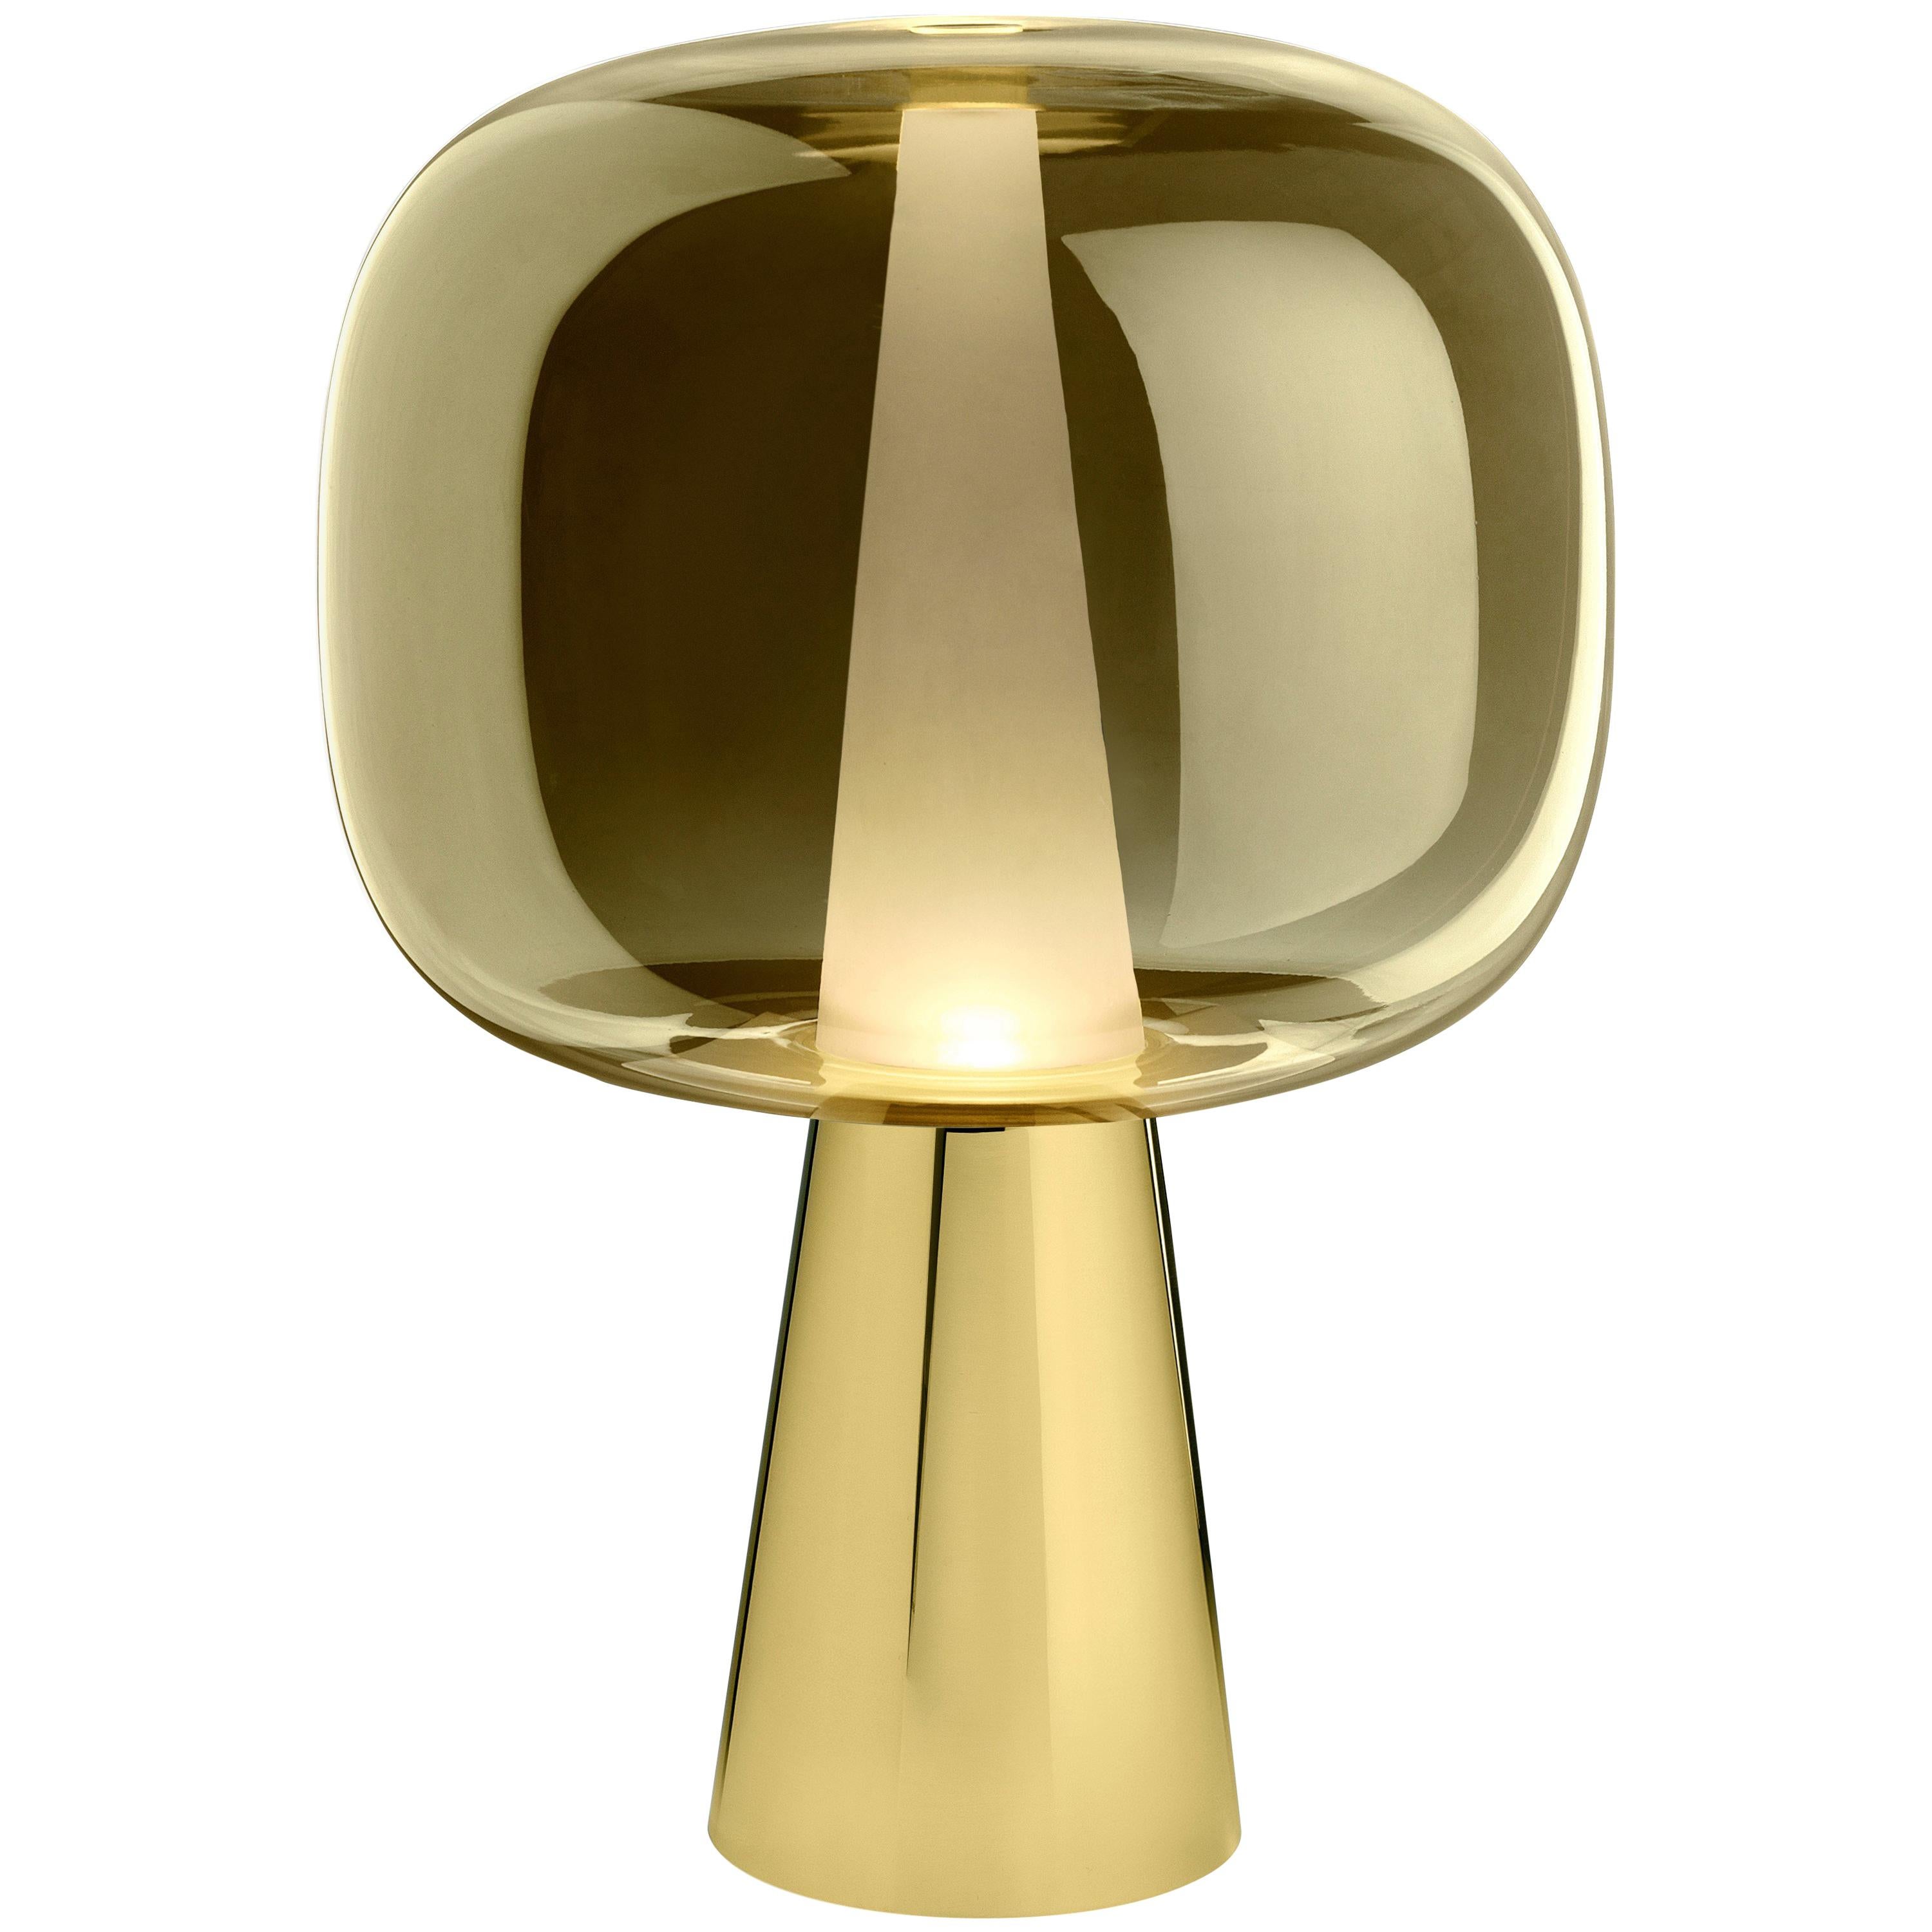 Ghidini 1961 Dusk Dawn Table Lamp in Brass and Metallic Glass by Branch